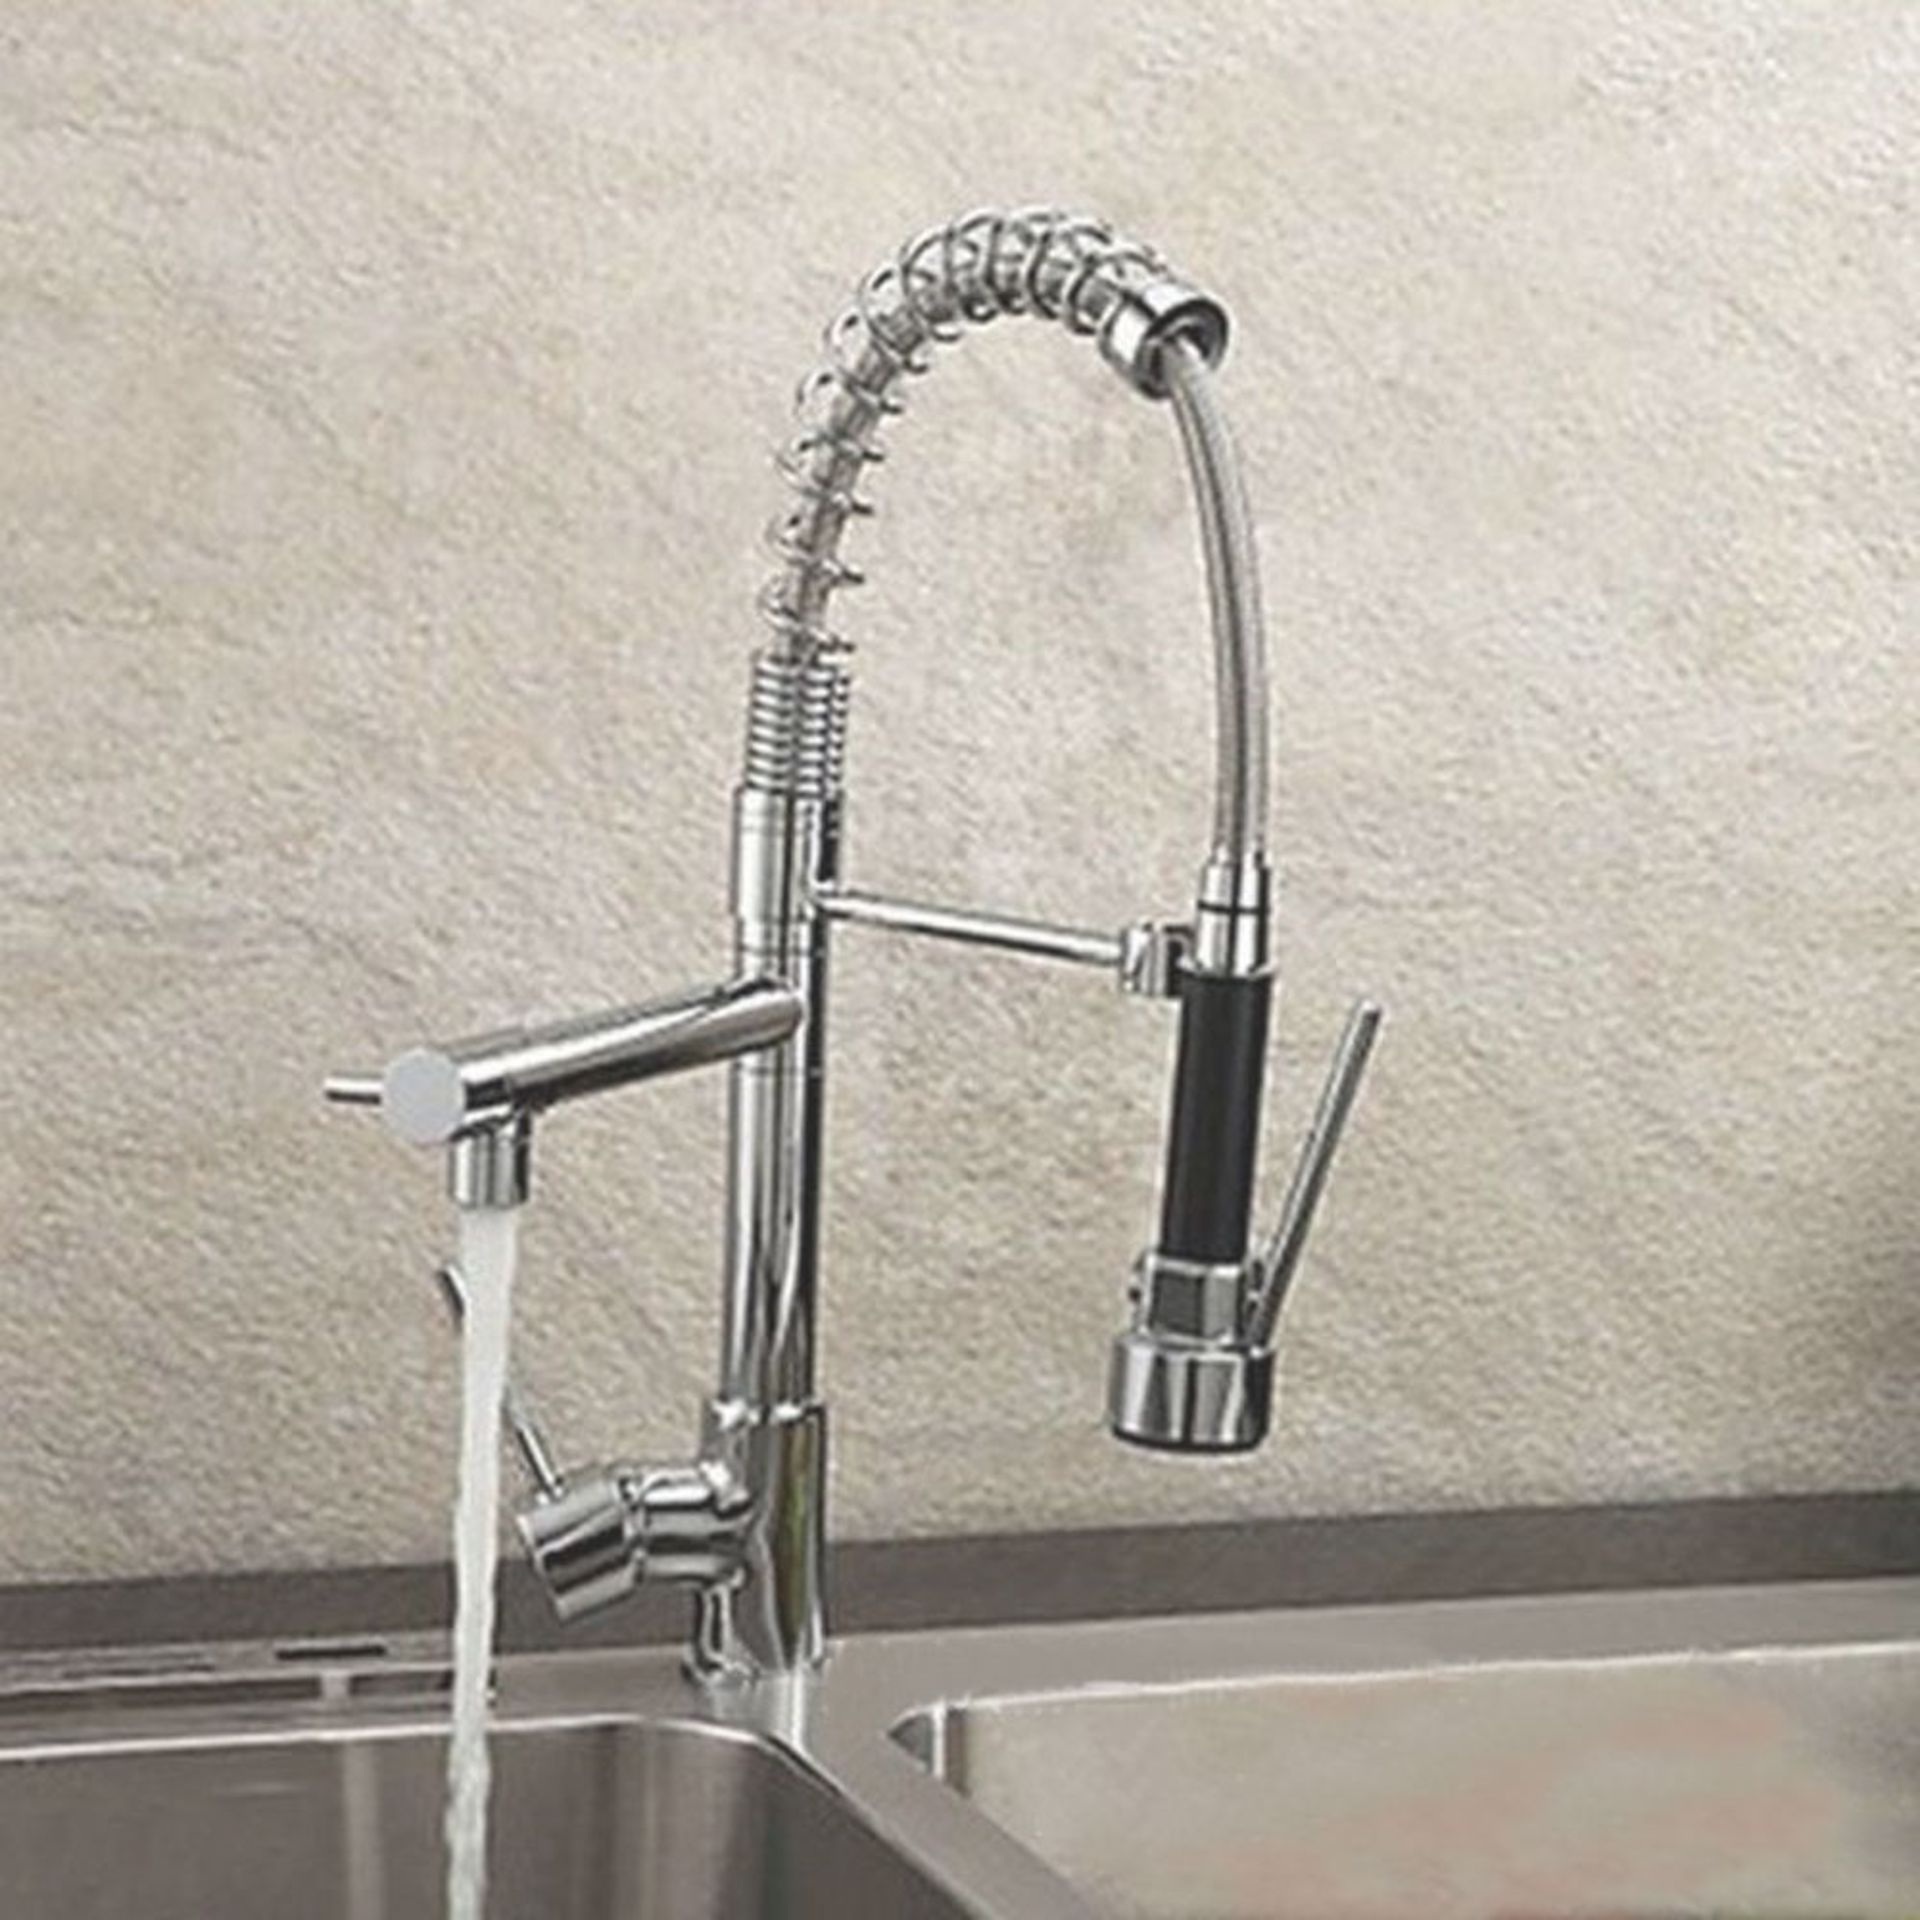 Bentley Modern Monobloc Chrome Brass Pull Out Spray Mixer Tap.RRP £349.99.This tap is fro...